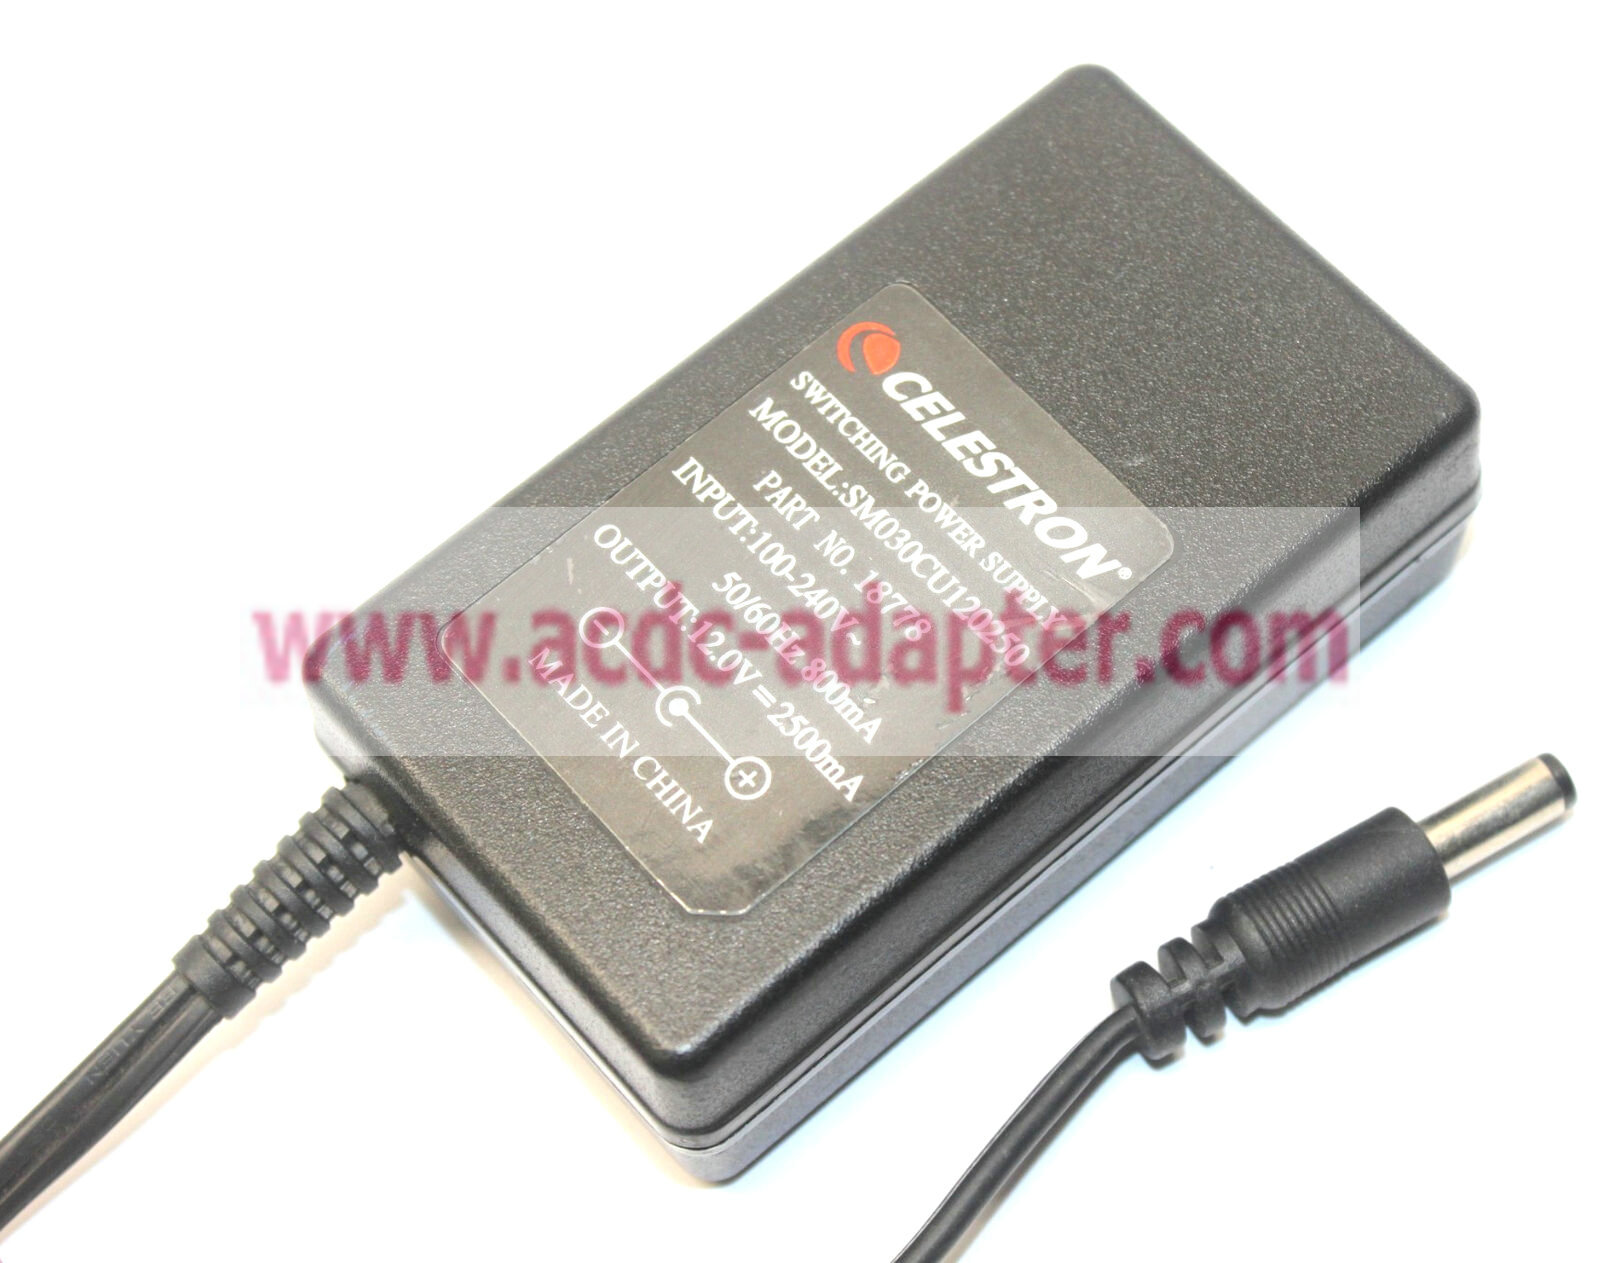 NEW Celestron SM030CU120250 12V 2500mA 18778 Switching Power Supply AC Adapter - Click Image to Close